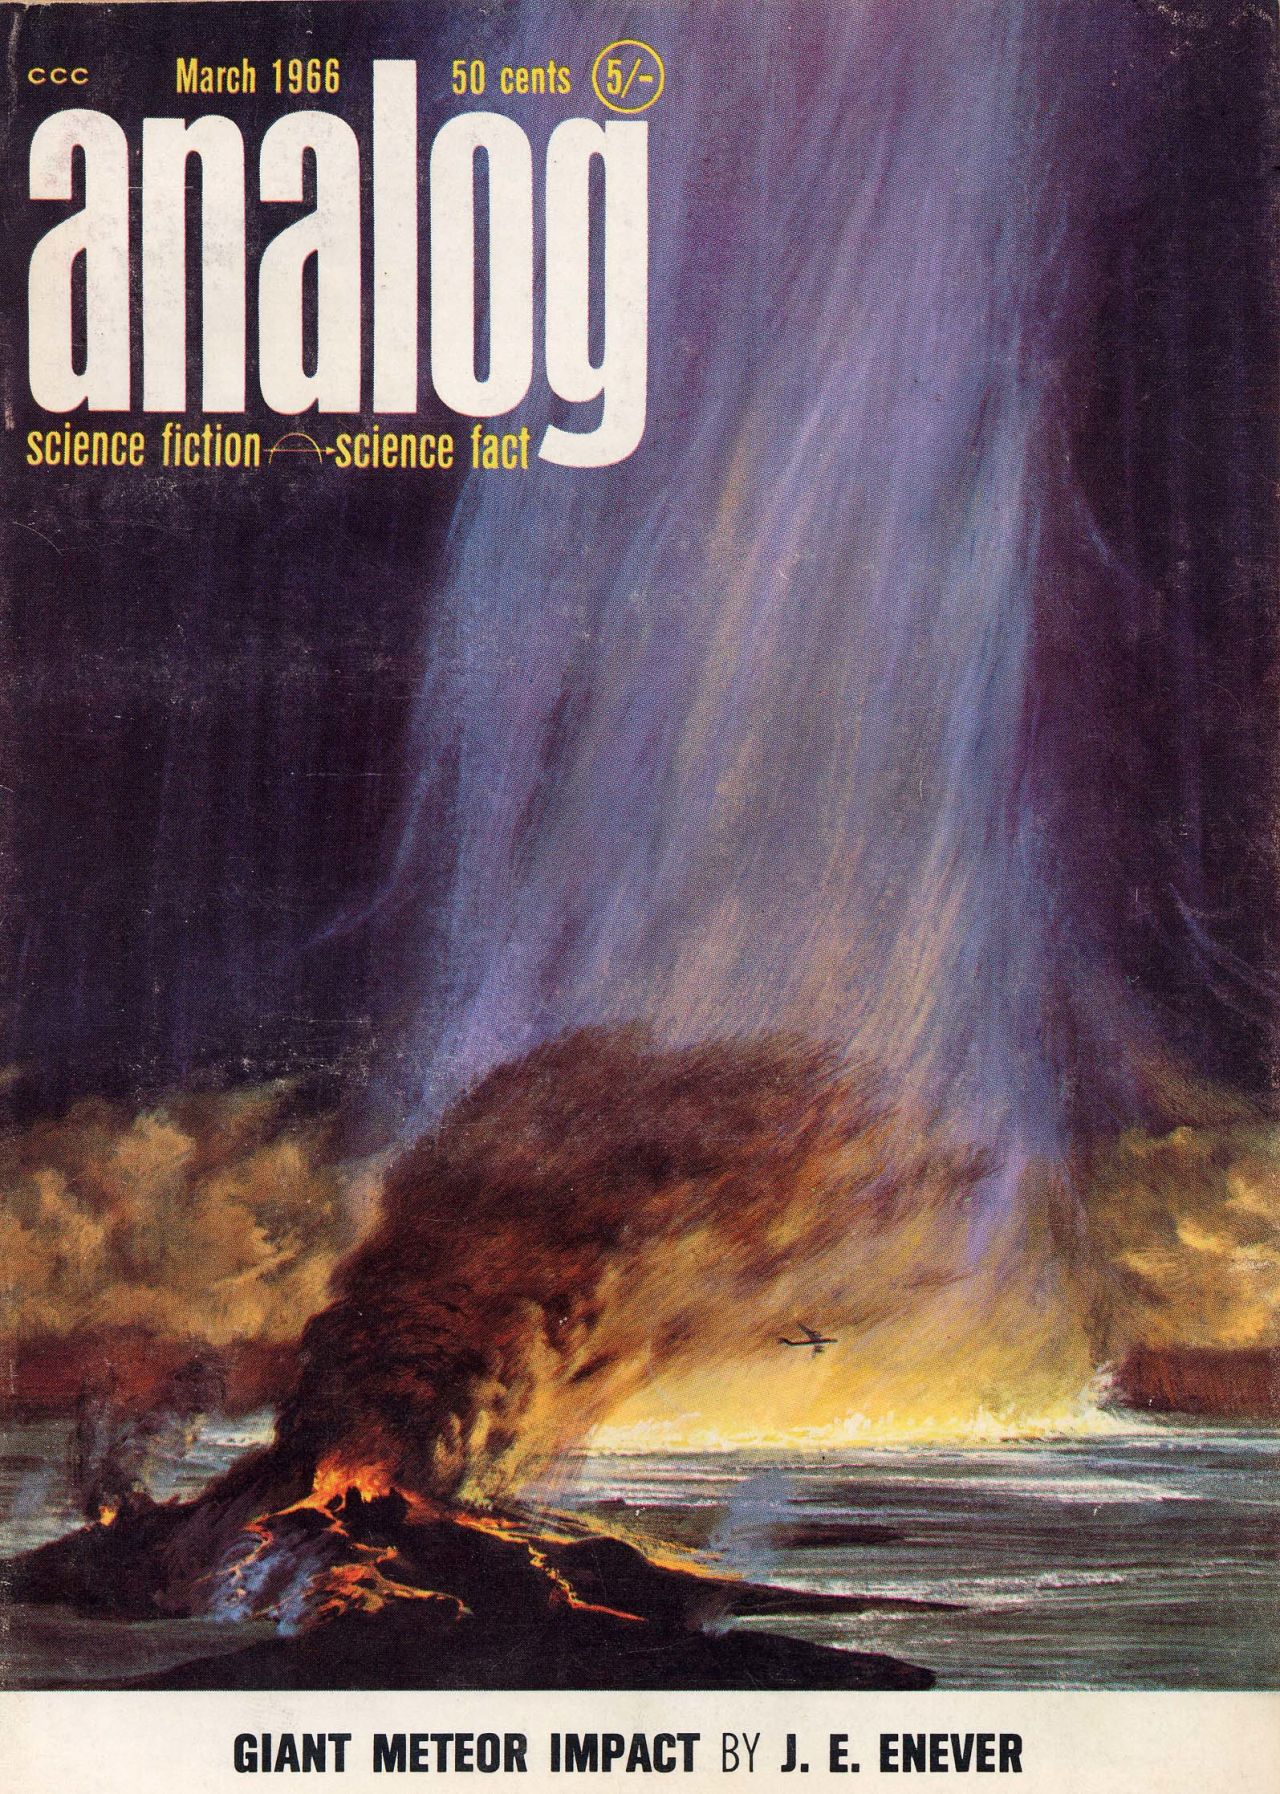 The March 1966 cover of  Analog Science Fiction/Science Fact featured an illustration of a meteor hitting Earth.  J.E. Enever published his ground-breaking article, "Giant Meteor Impact," in this issue, detailing what such strikes could do, and have done, to our planet. His vivid prose and terrifying physics woke scientists up to the potential of huge space boulders slamming into the Earth.